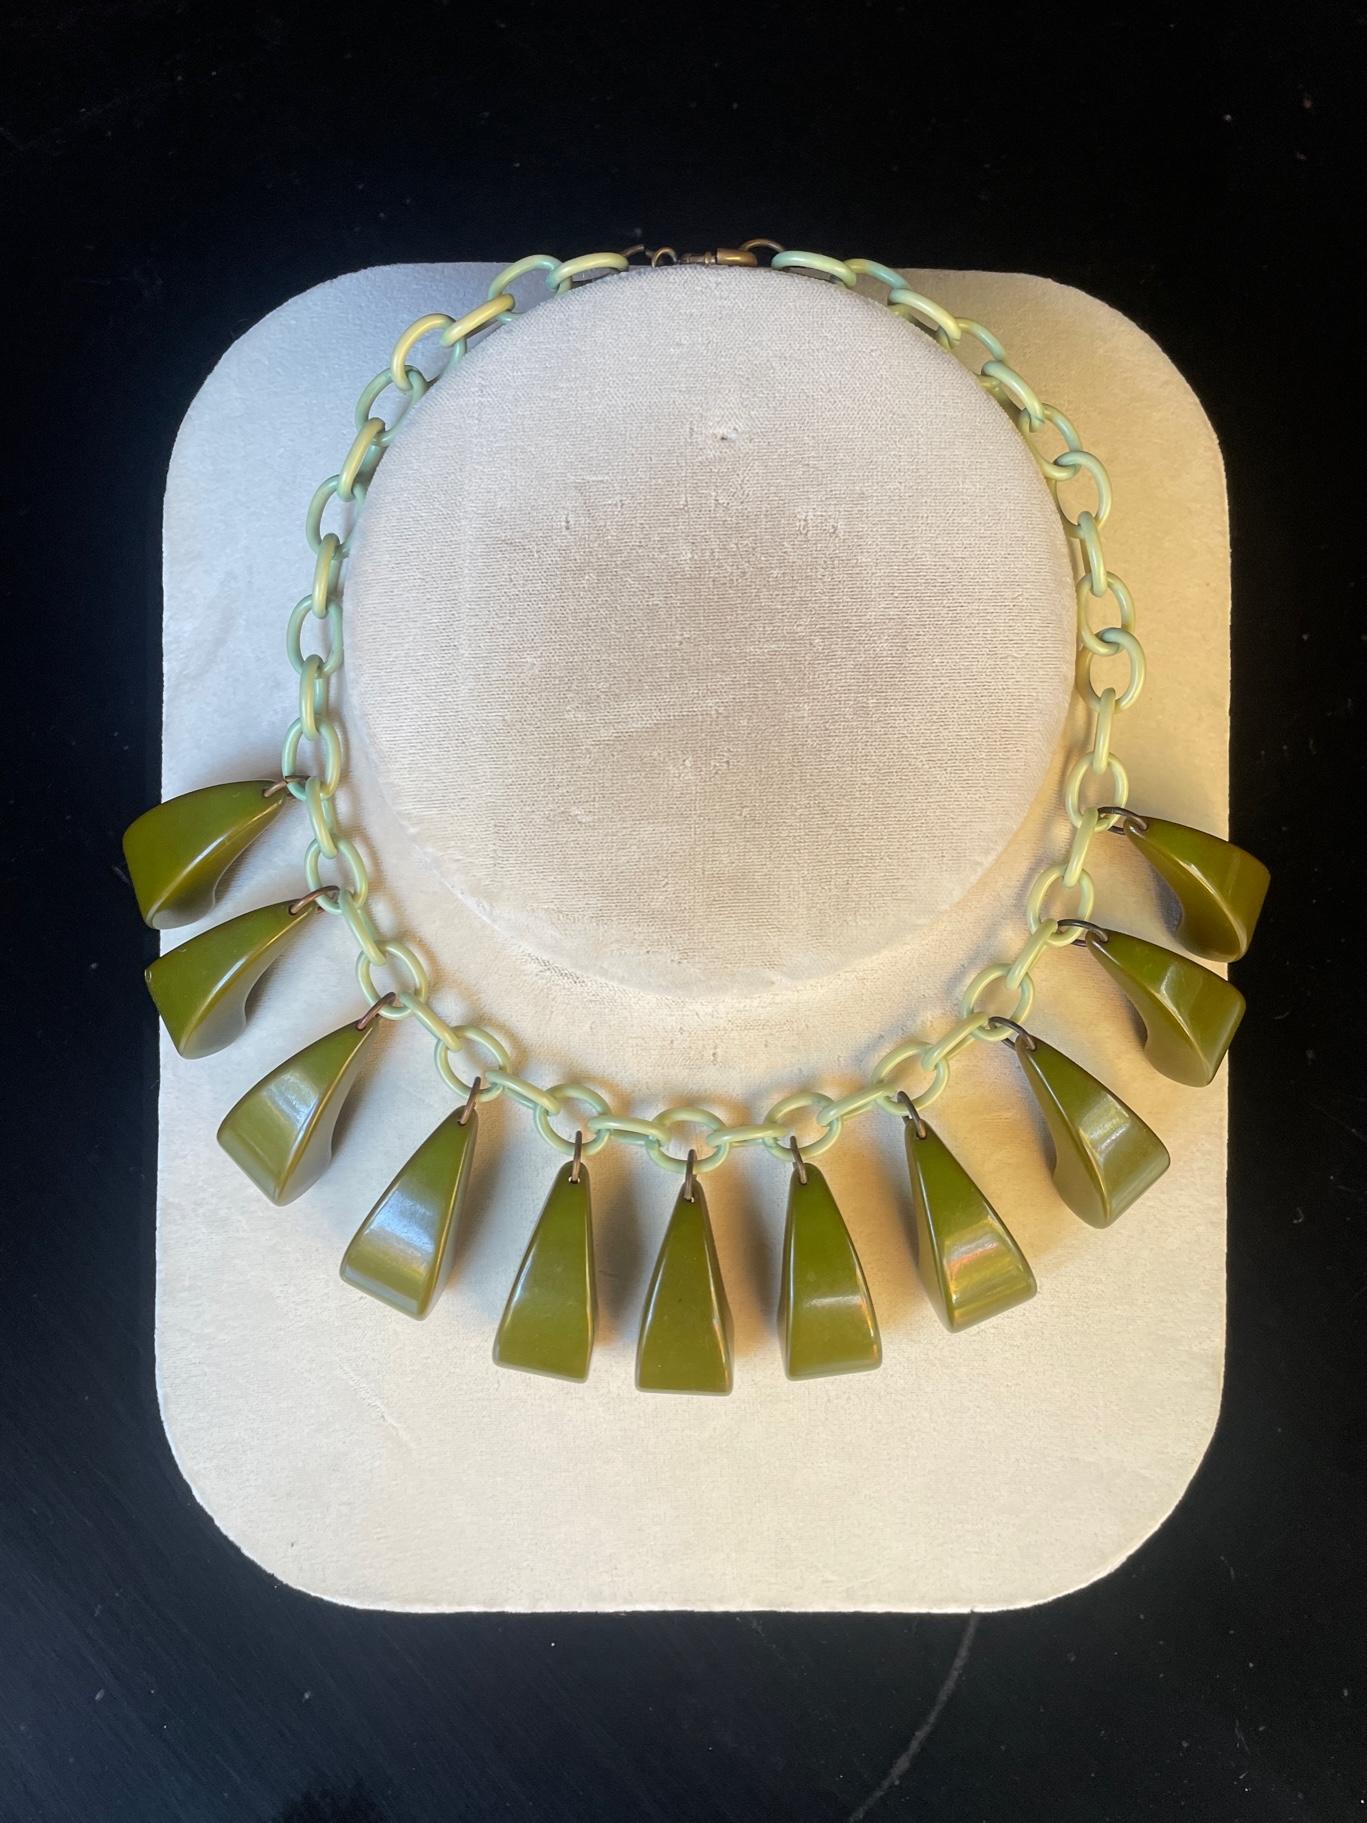 1930s Art Deco Bakelite + Celluloid Linked Necklace Dark Green Arching Dangles For Sale 3